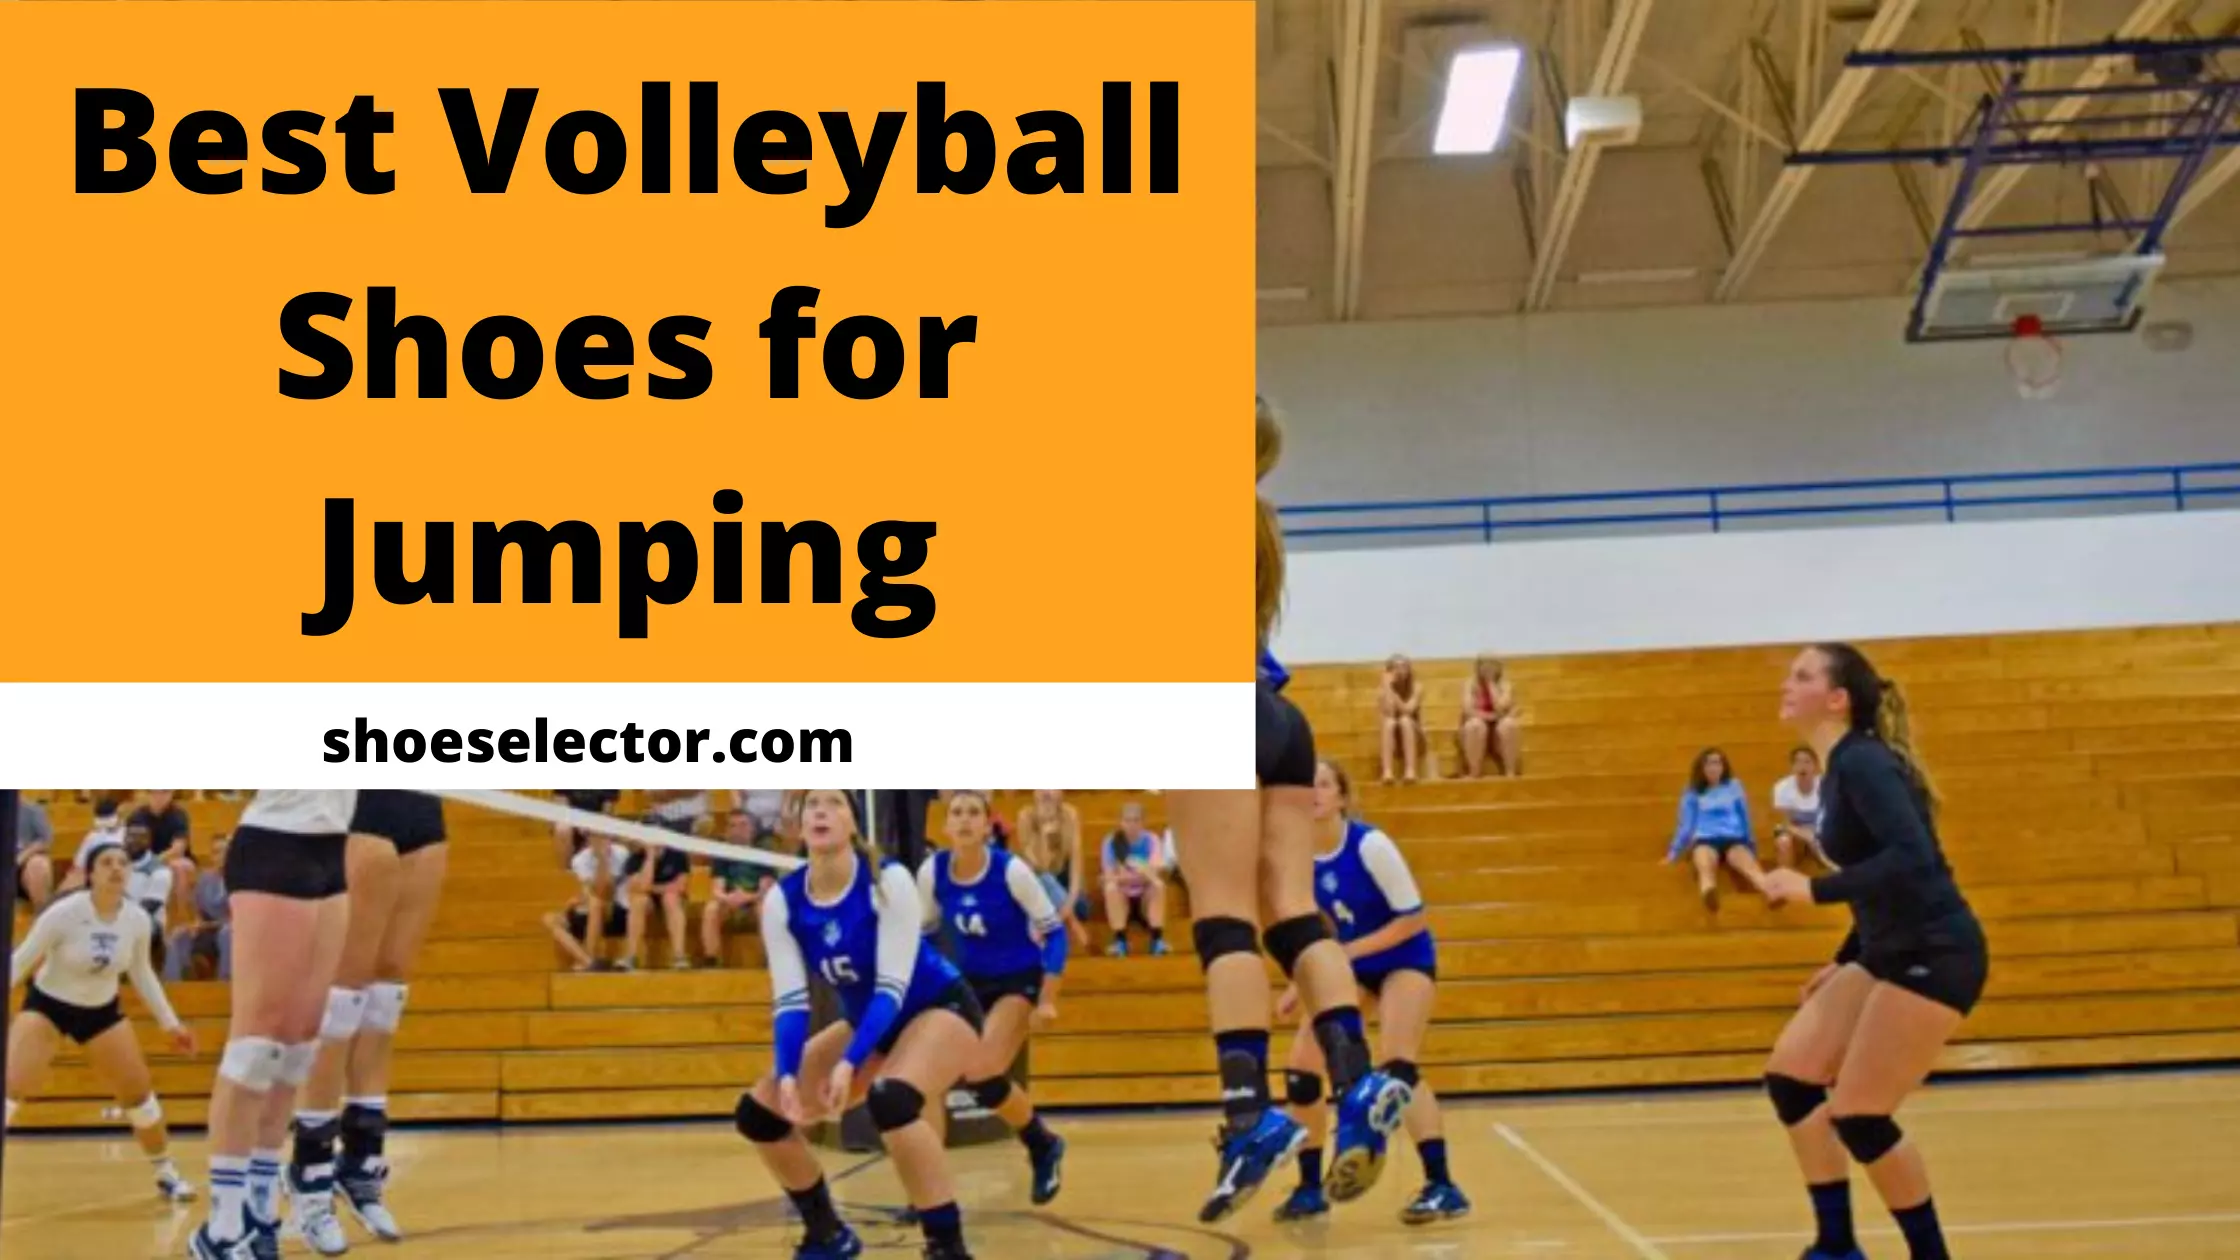 Best Volleyball Shoes For Jumping - Most Supportive Shoes